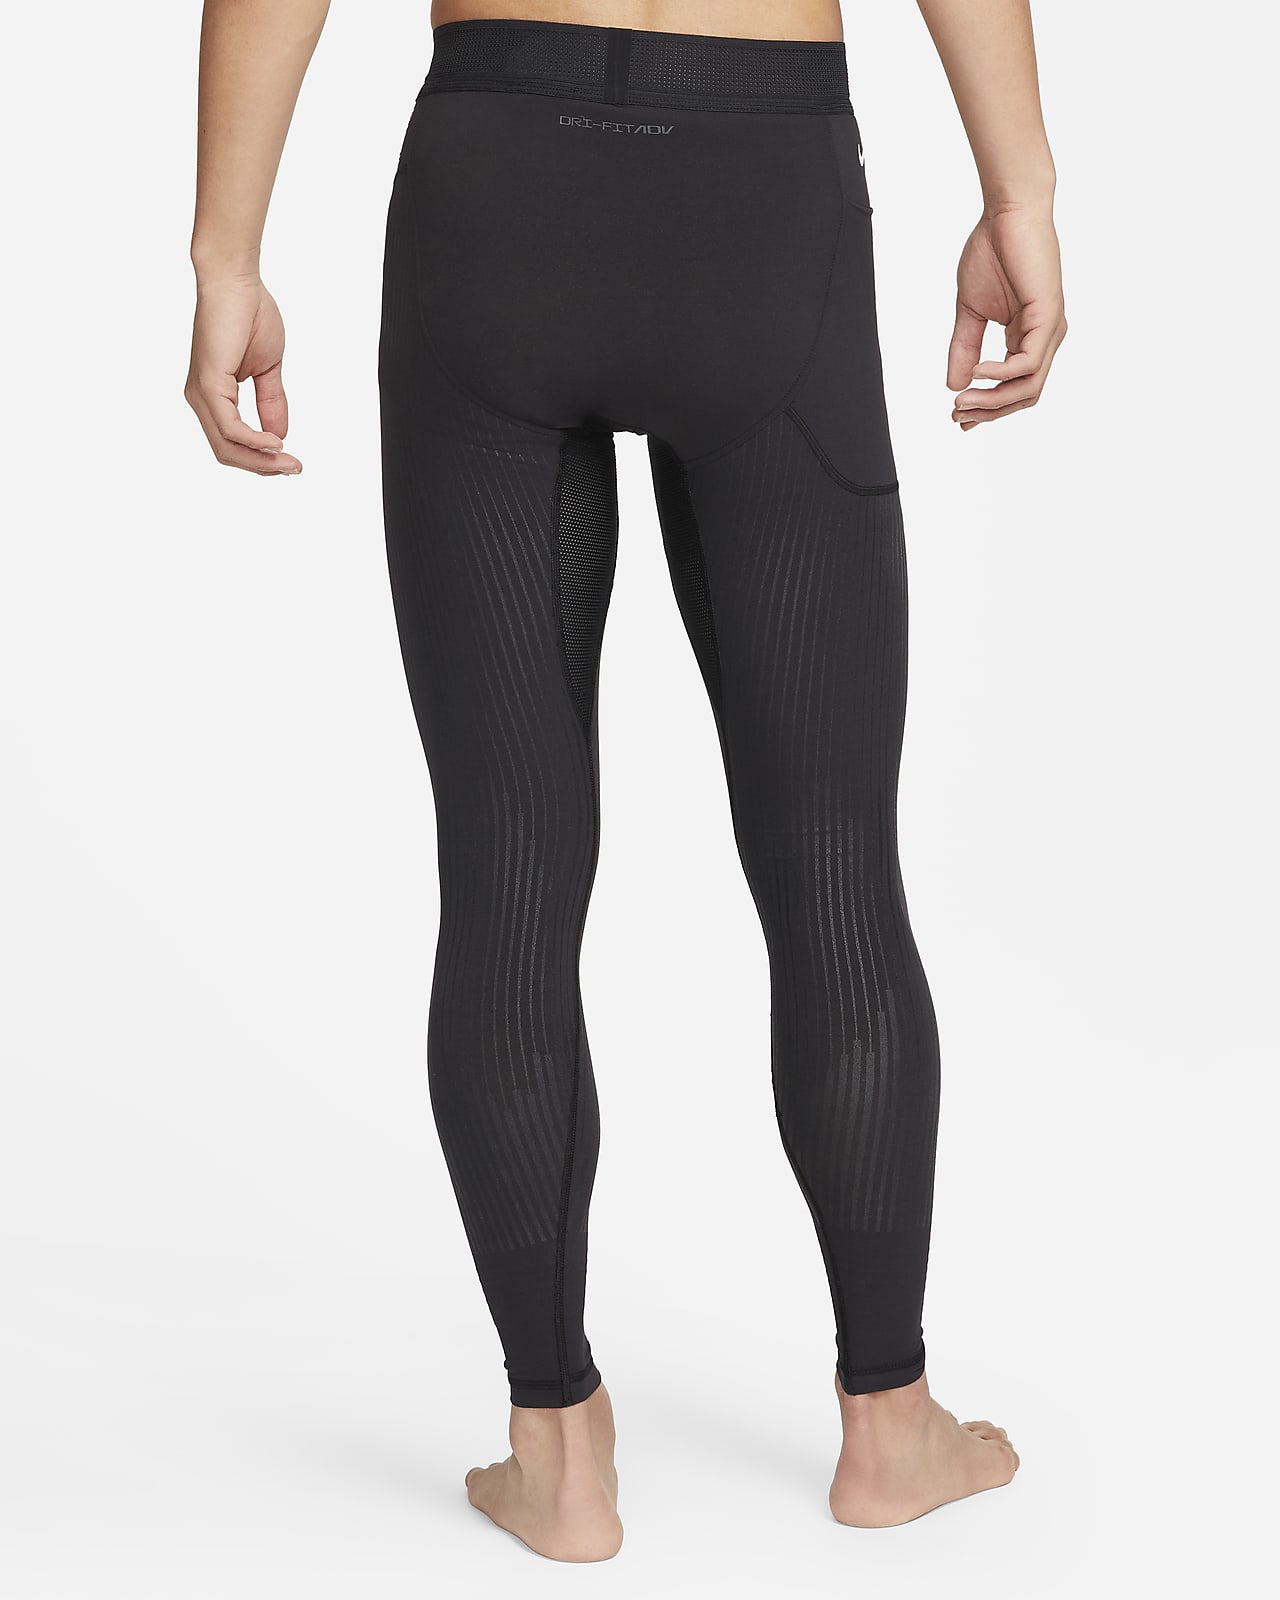 Nike Pro DRI FIT ADV Recovery Compression Tights Training Pants